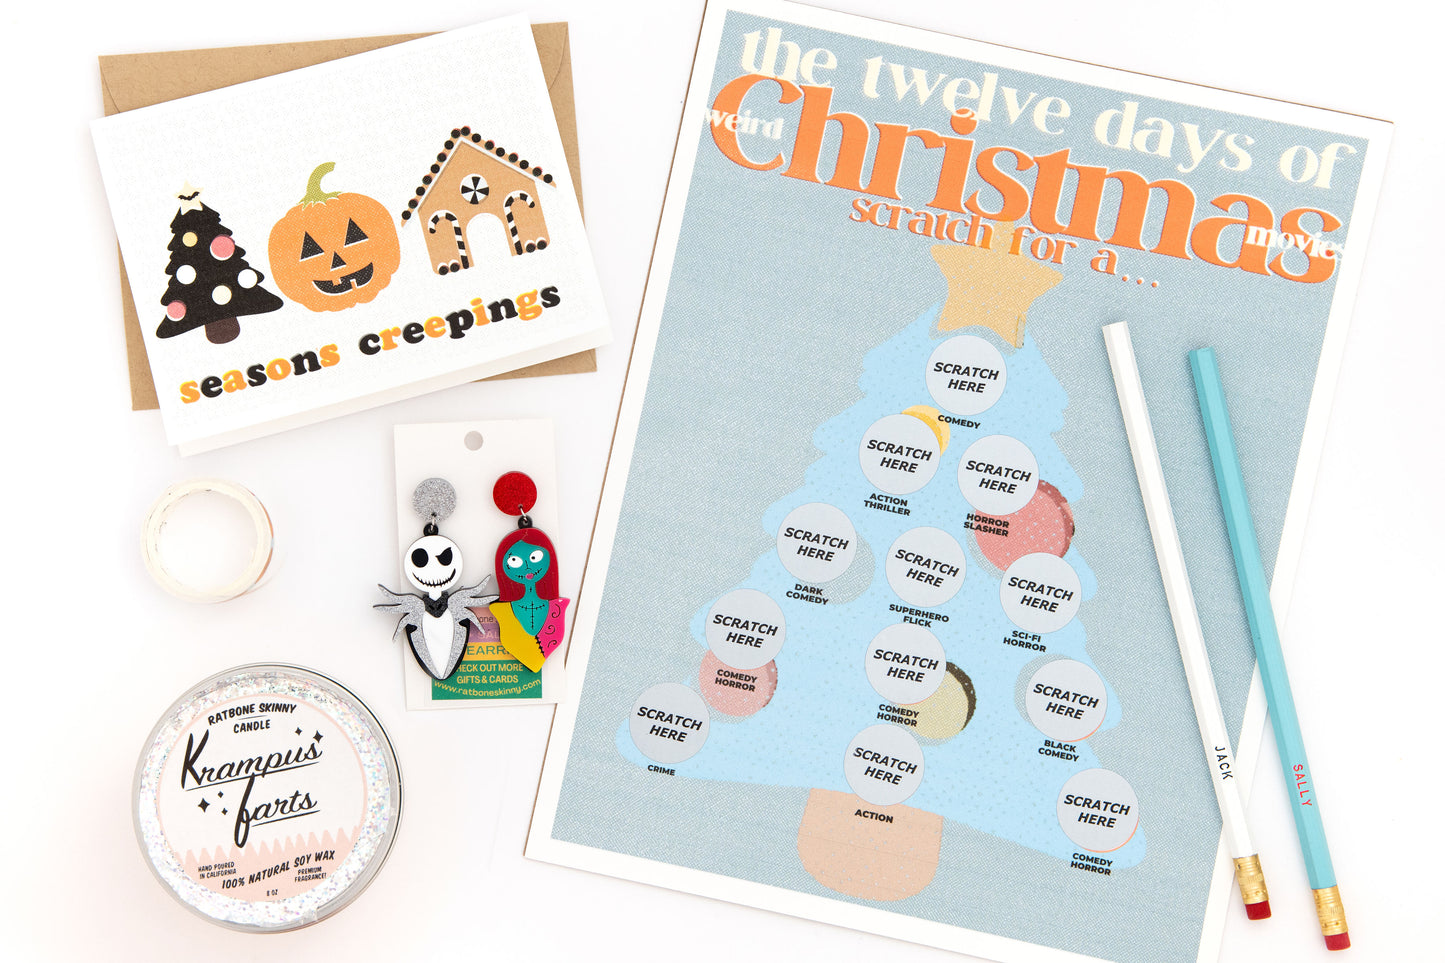 Christmas-themed subscription box with scratch-off movie items art print, pumpkin tree holiday greeting card, Jack and Sally earrings and pencil set, Krampus candle, and decorative washi tape for DIY holiday crafts